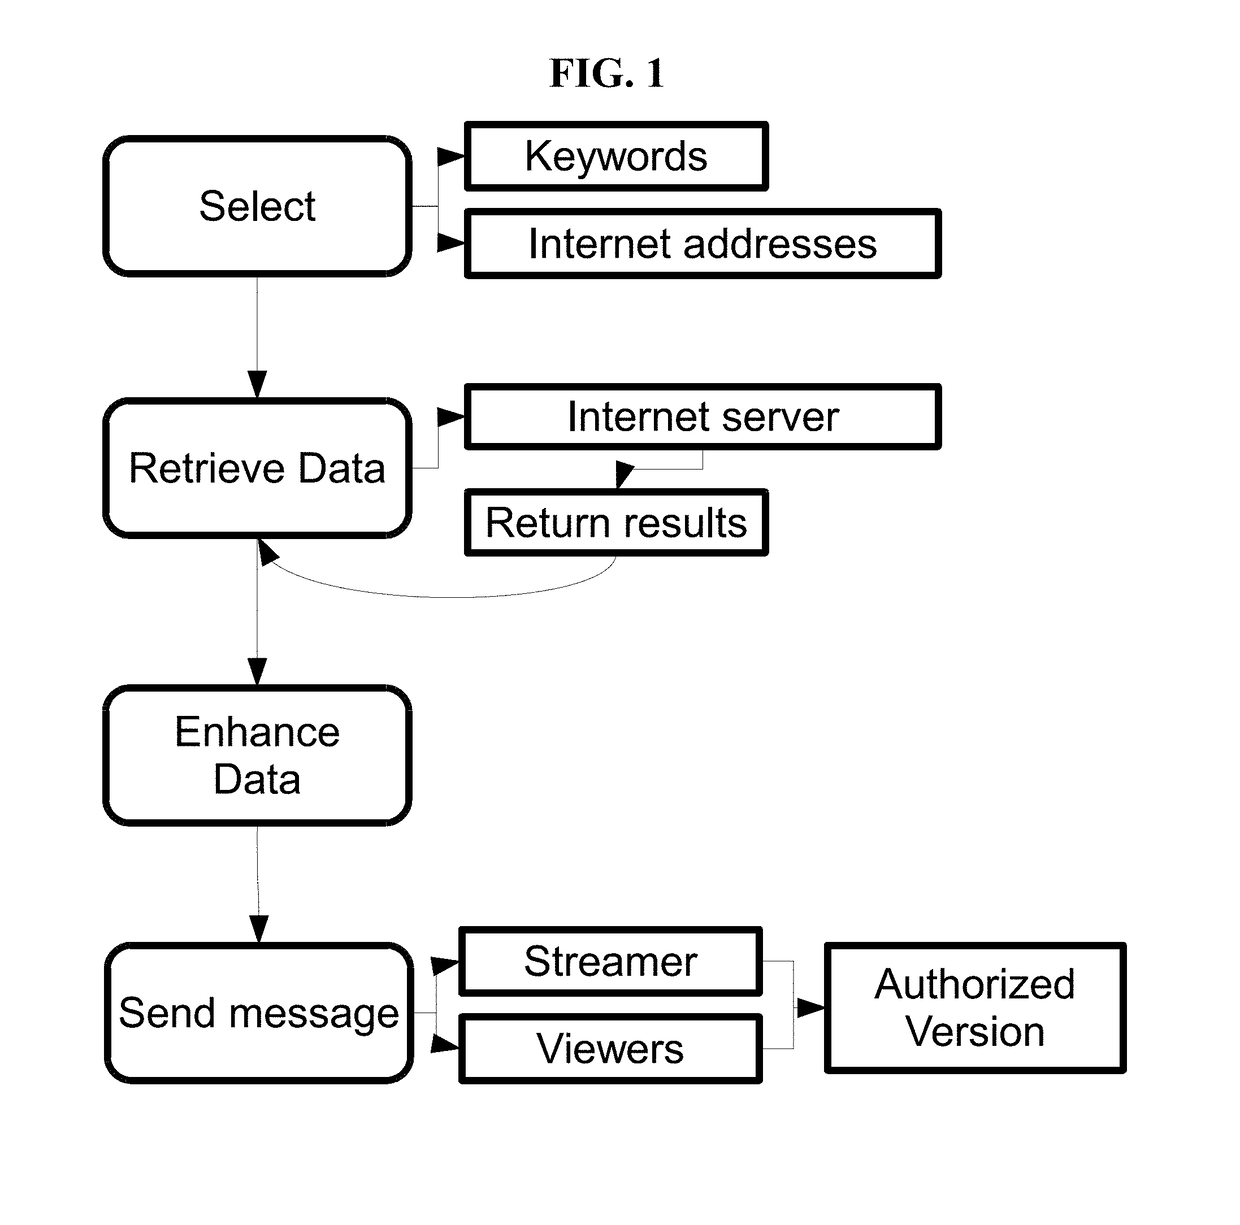 Methods for identifying, disrupting and monetizing the illegal sharing and viewing of digital and analog streaming content